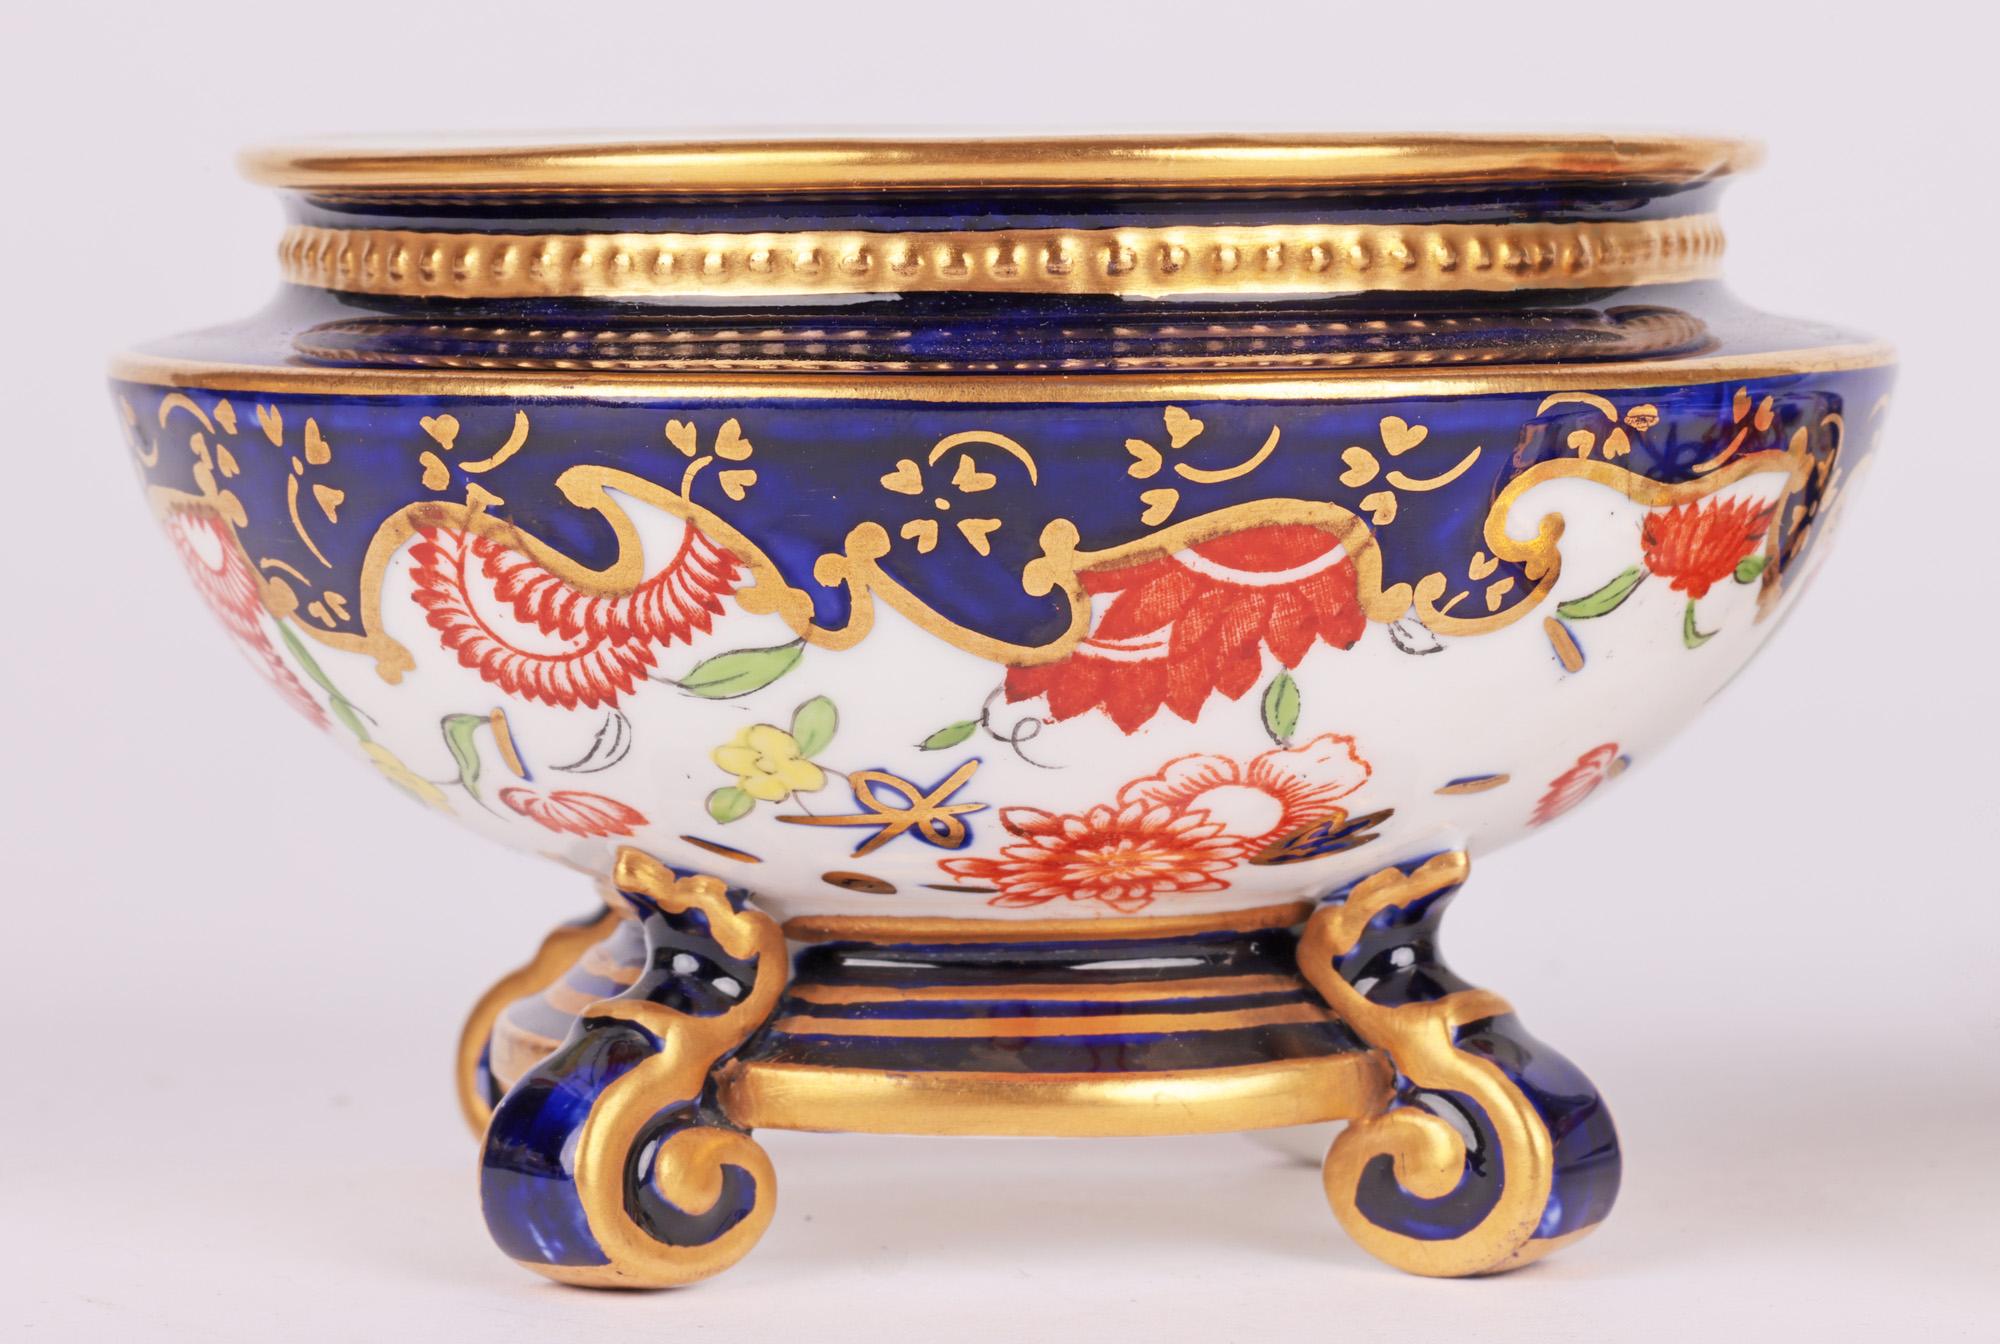 Royal crown derby imari pattern porcelain lidded trinket pot
A stunning early art deco royal crown derby imari pattern porcelain lidded trinket pot dating from 1915. This finely made pot stands raised on four scroll feet supporting a narrow round